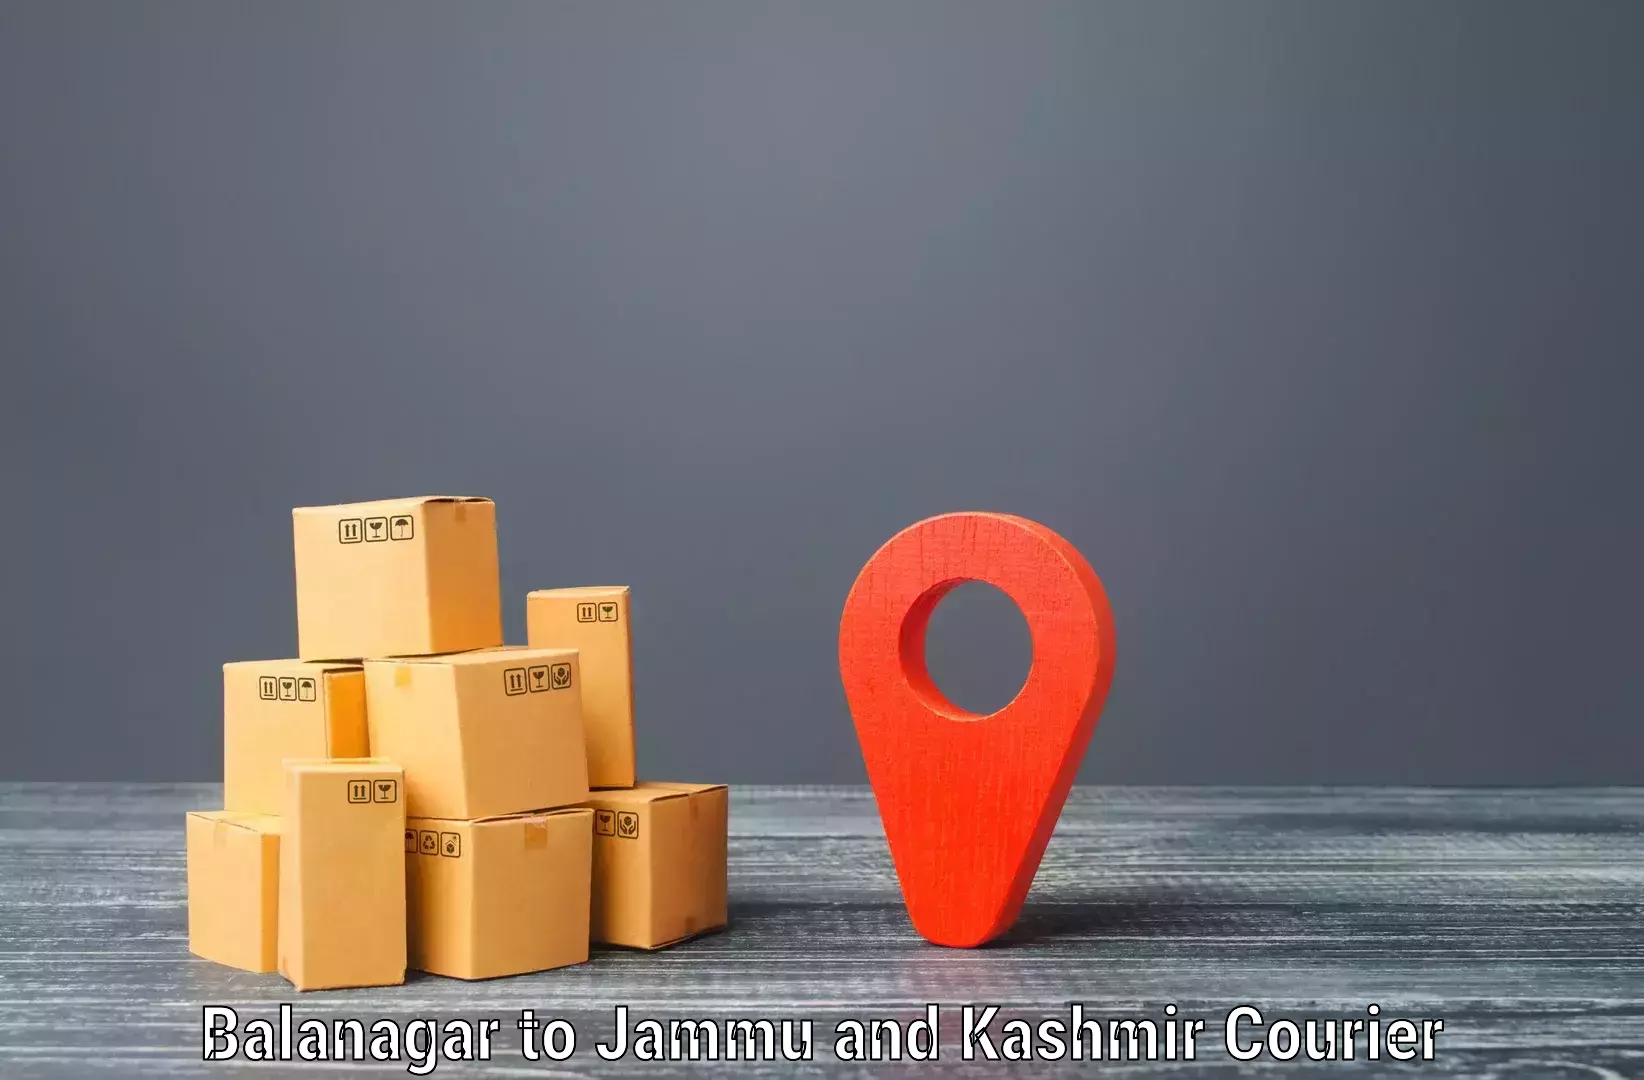 Package delivery network Balanagar to Jammu and Kashmir